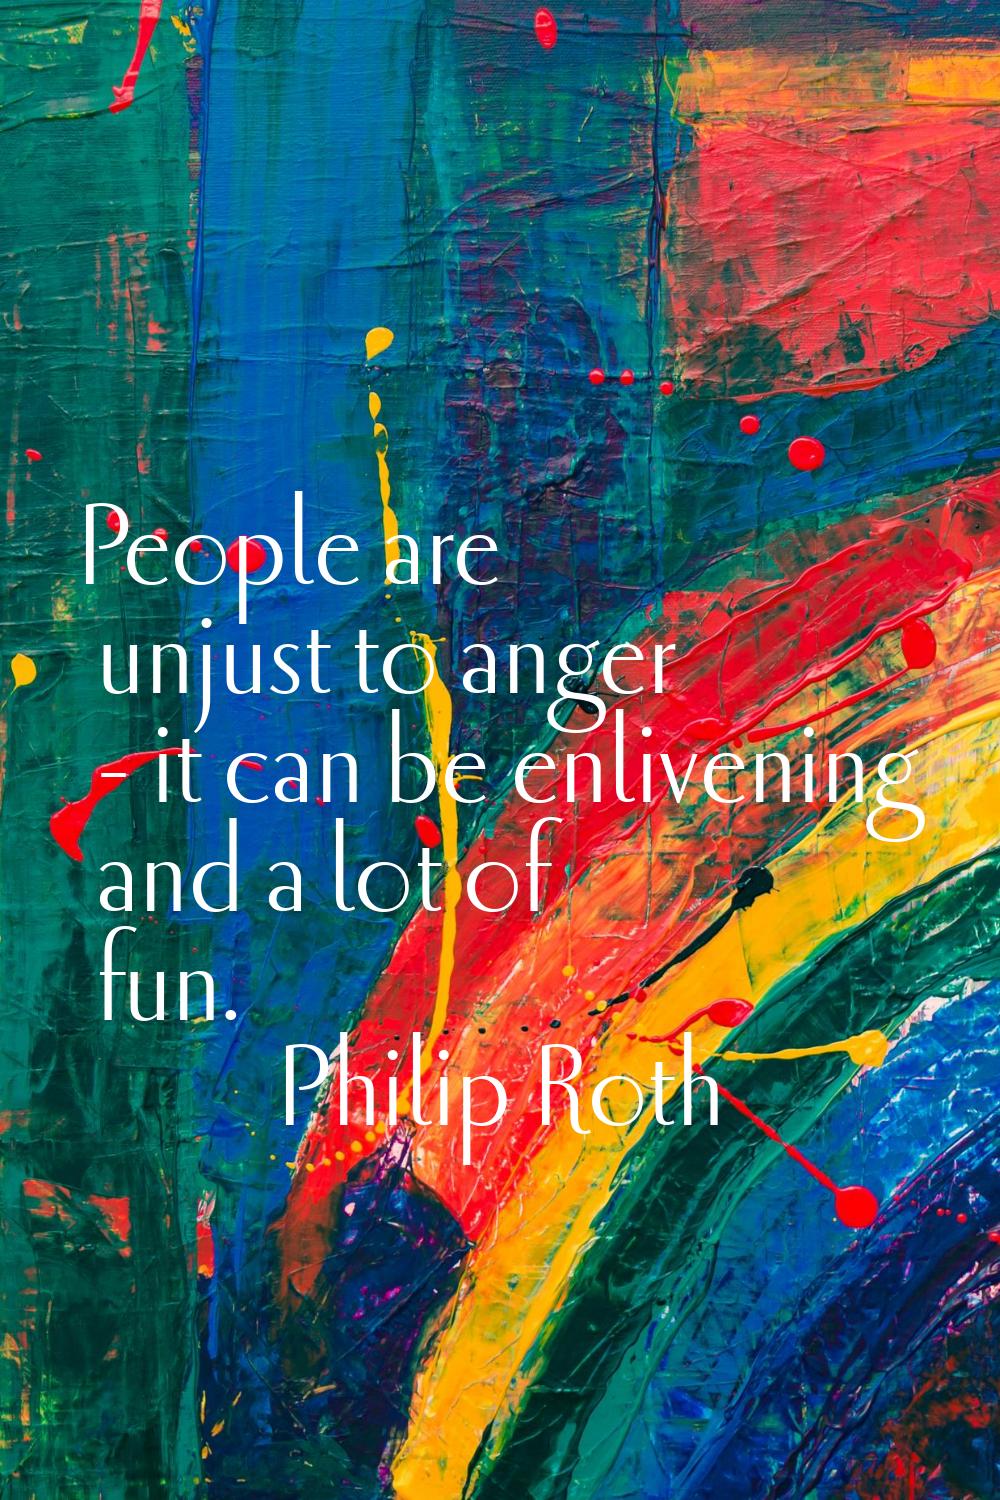 People are unjust to anger - it can be enlivening and a lot of fun.